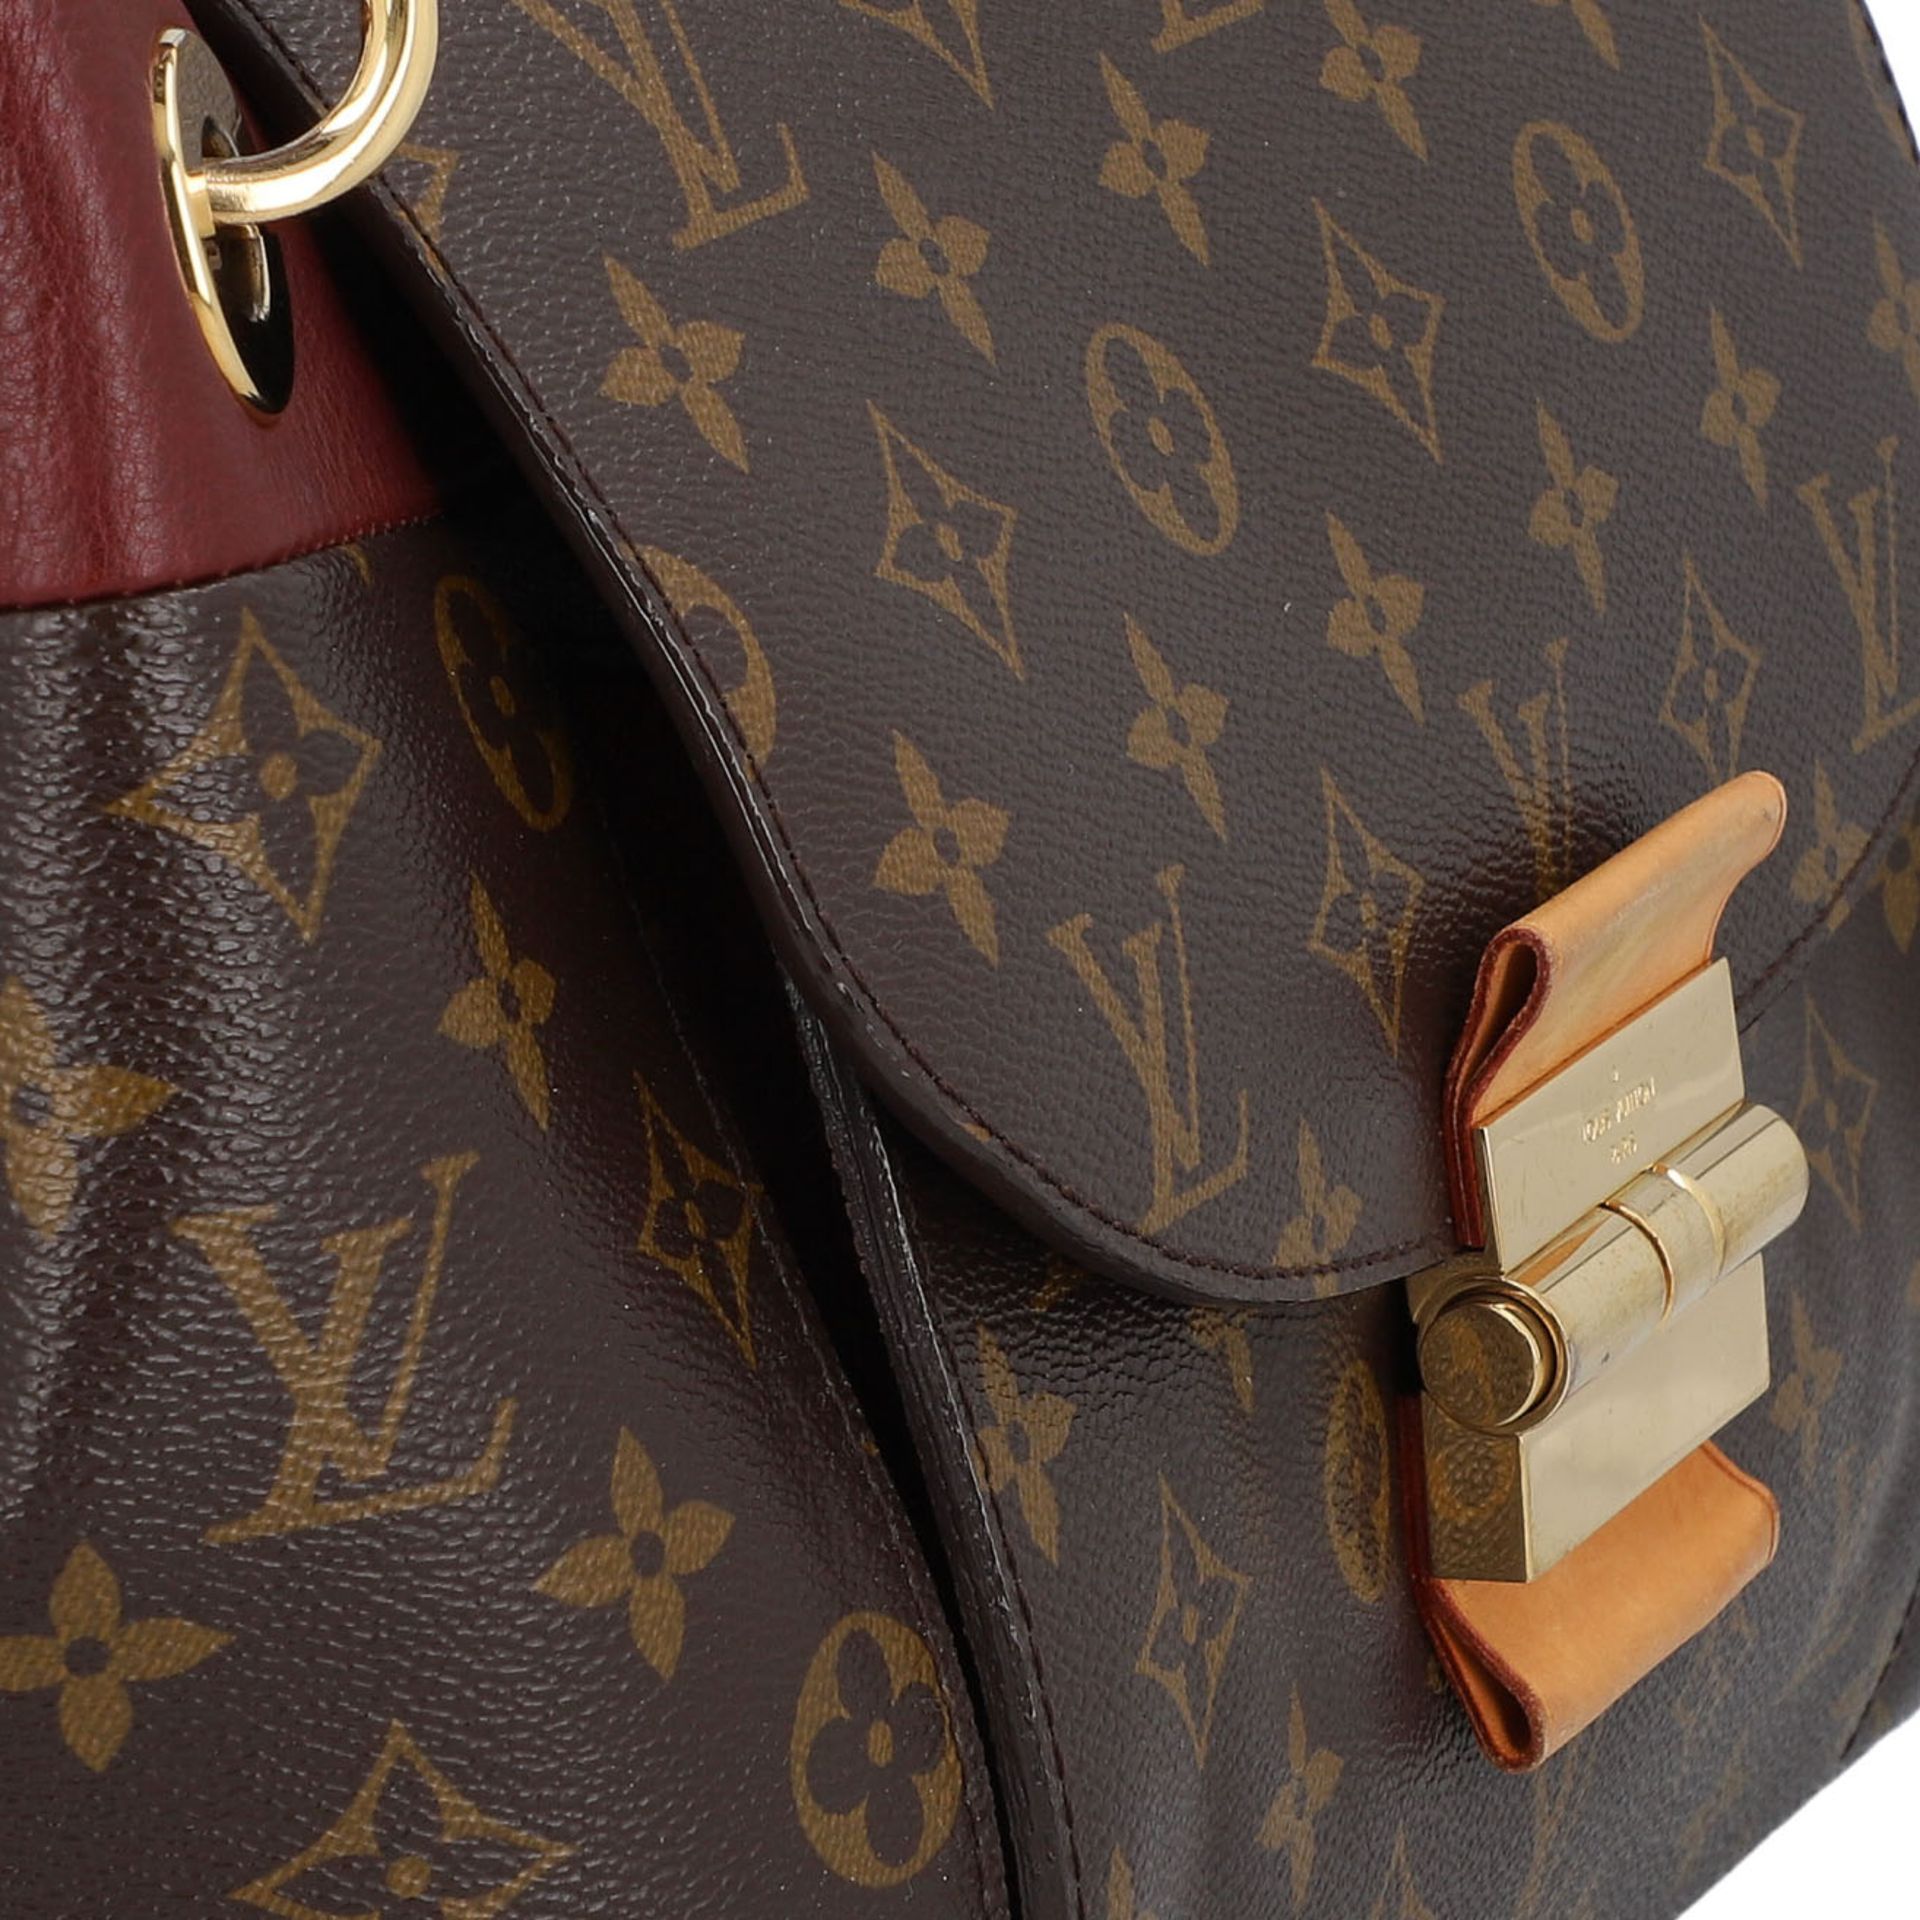 LOUIS VUITTON Schultertasche "OLYMPE", Koll.: 2011. - Image 8 of 8